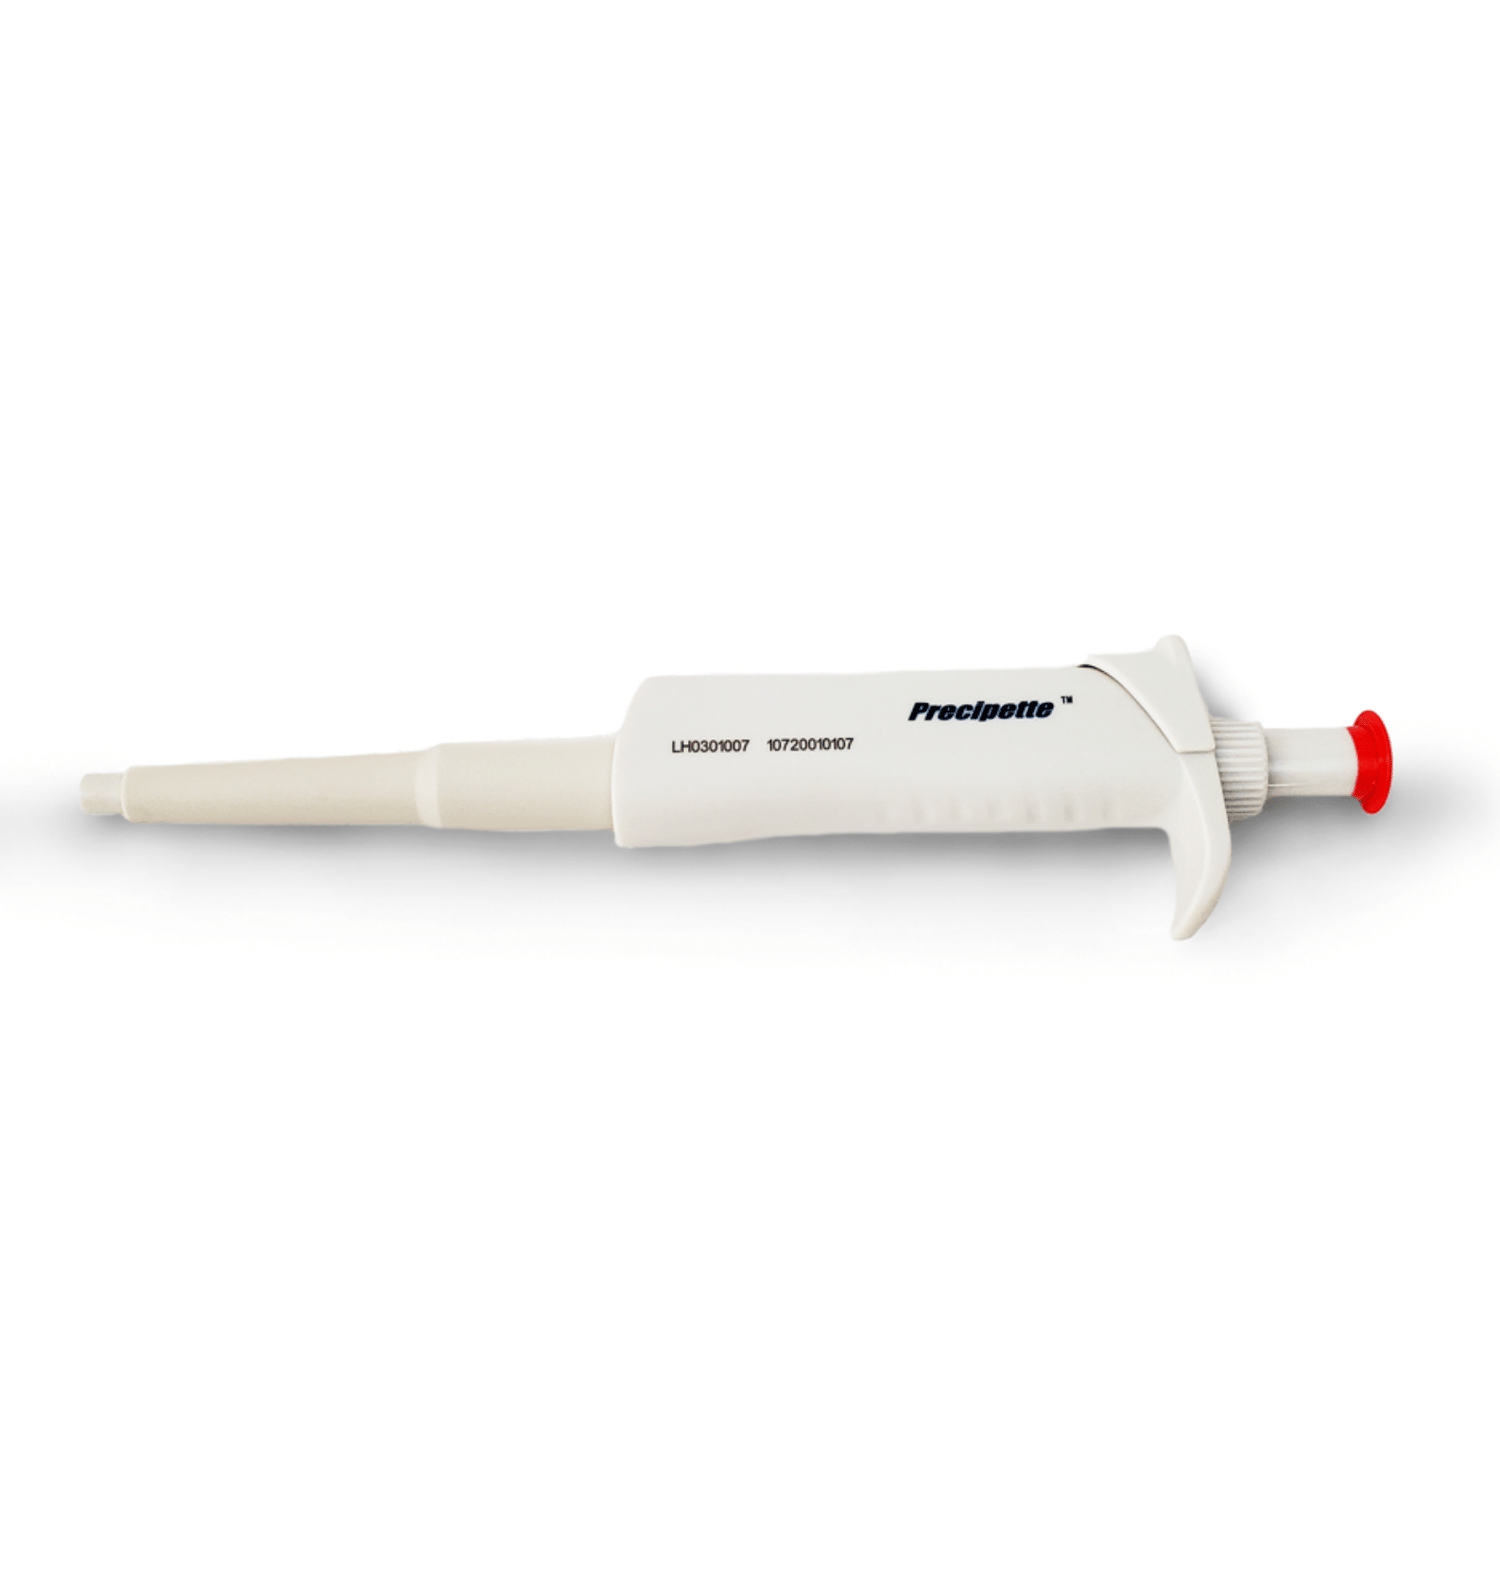 Four E's Single Channel Adjustable Micro Pipette Flat View